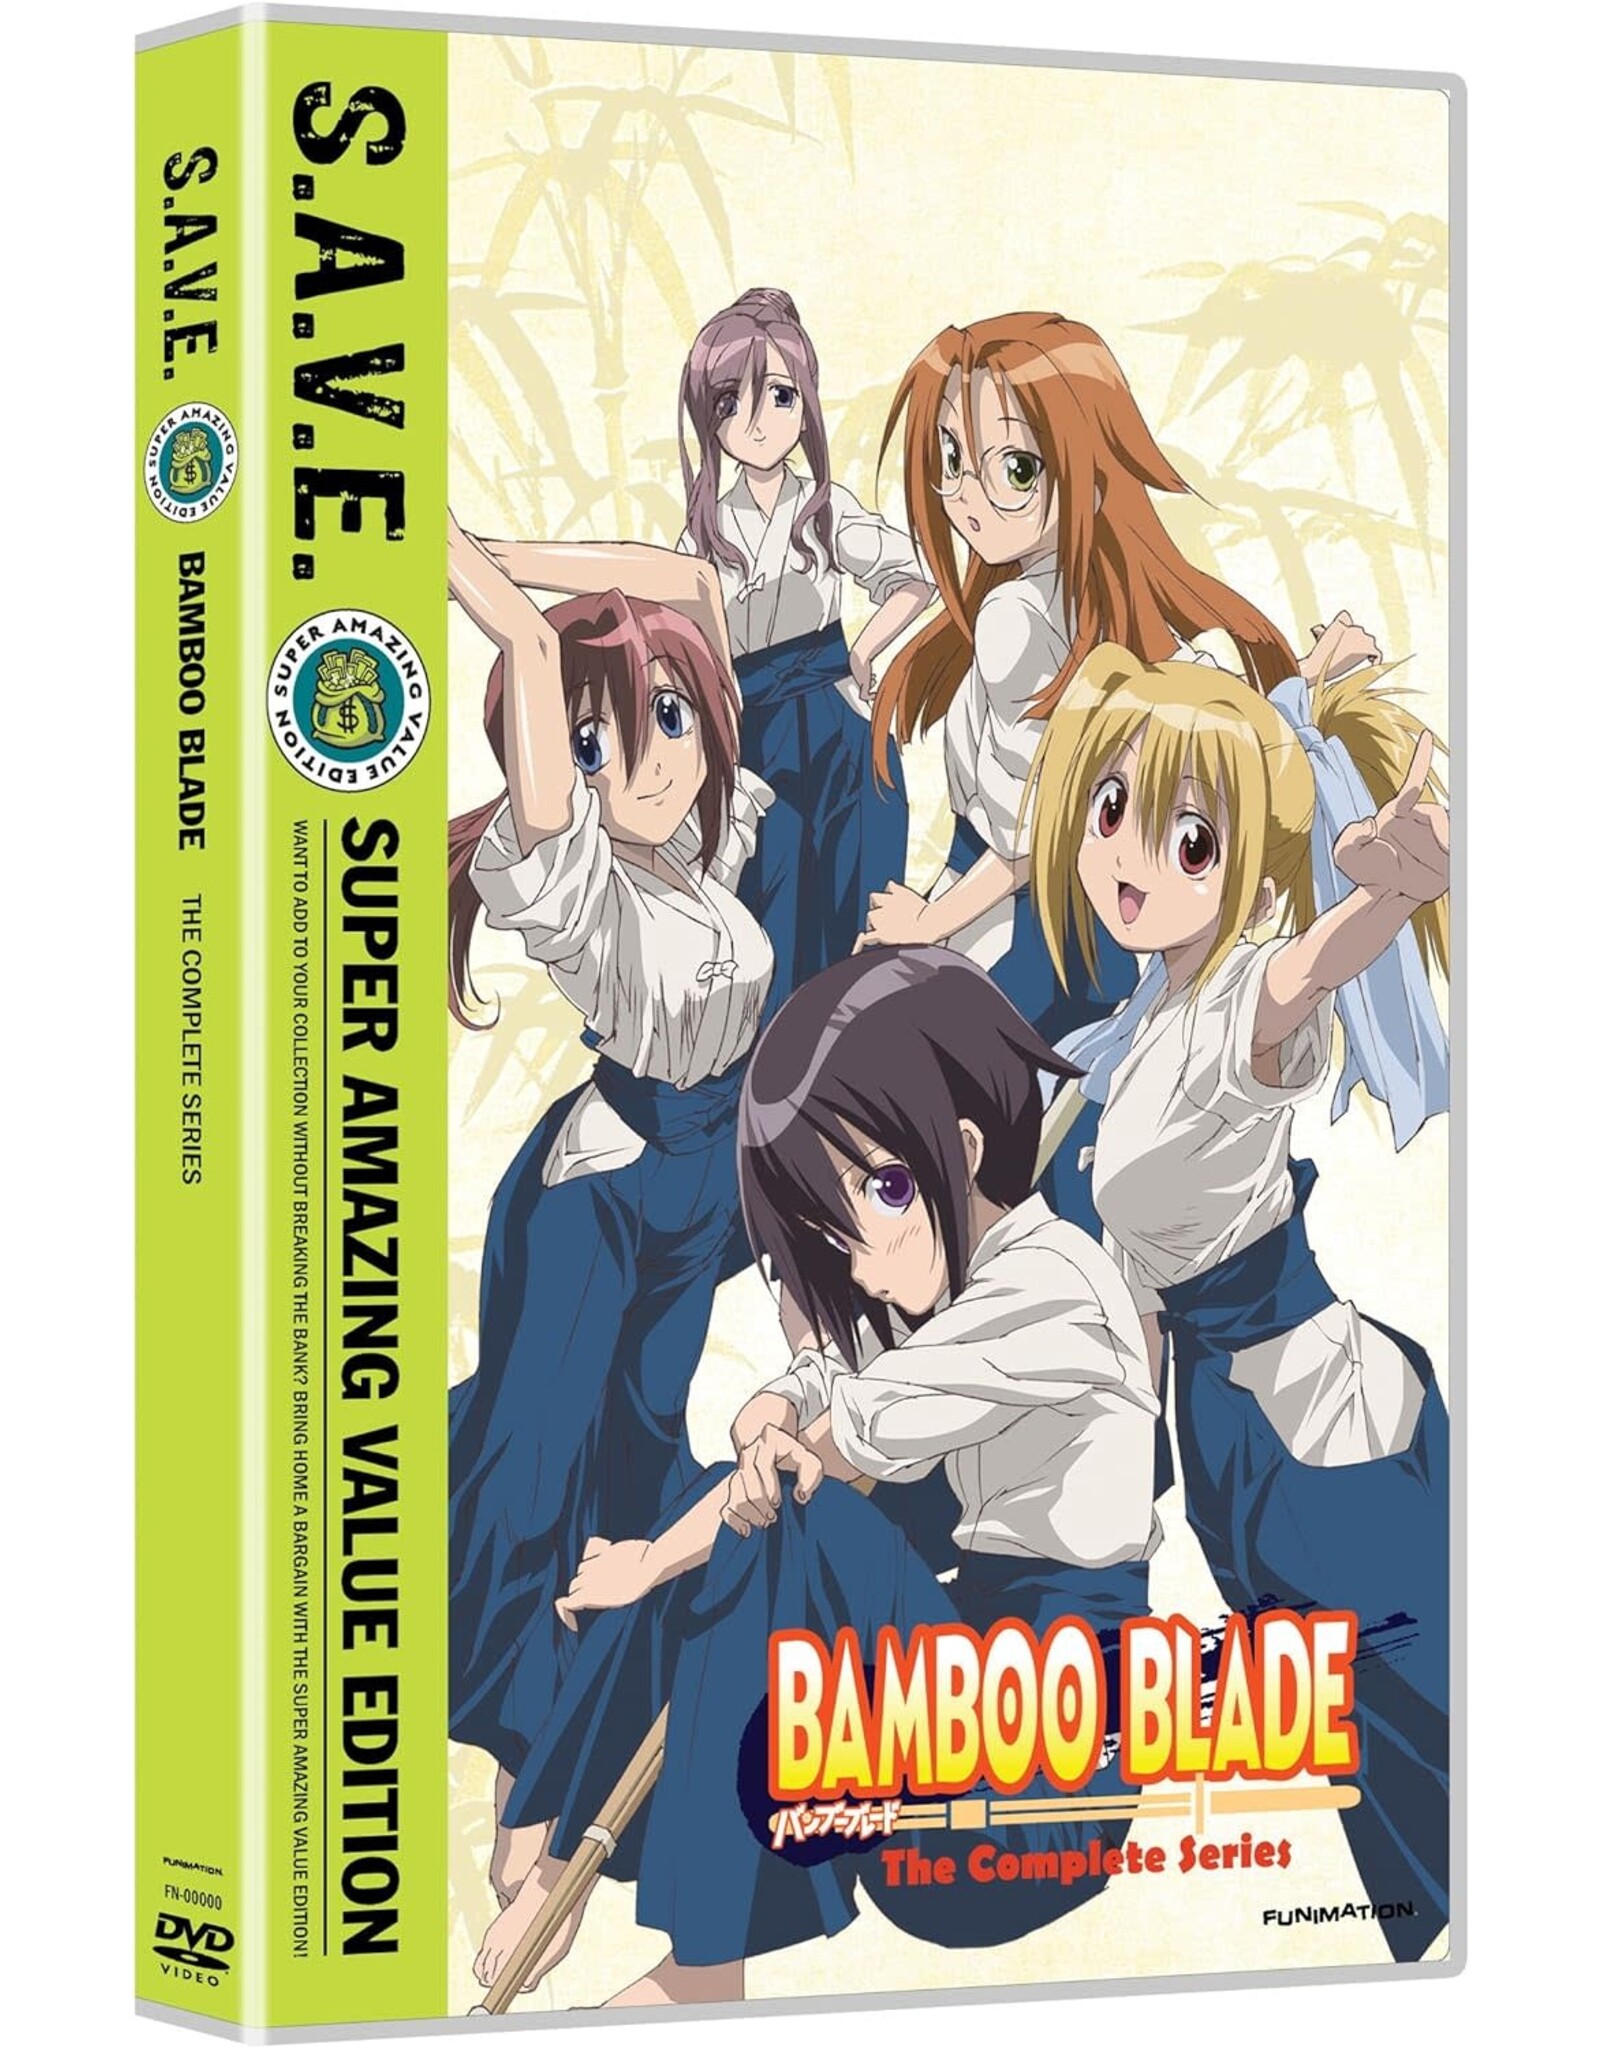 Anime & Animation Bamboo Blade Complete Series (Used)